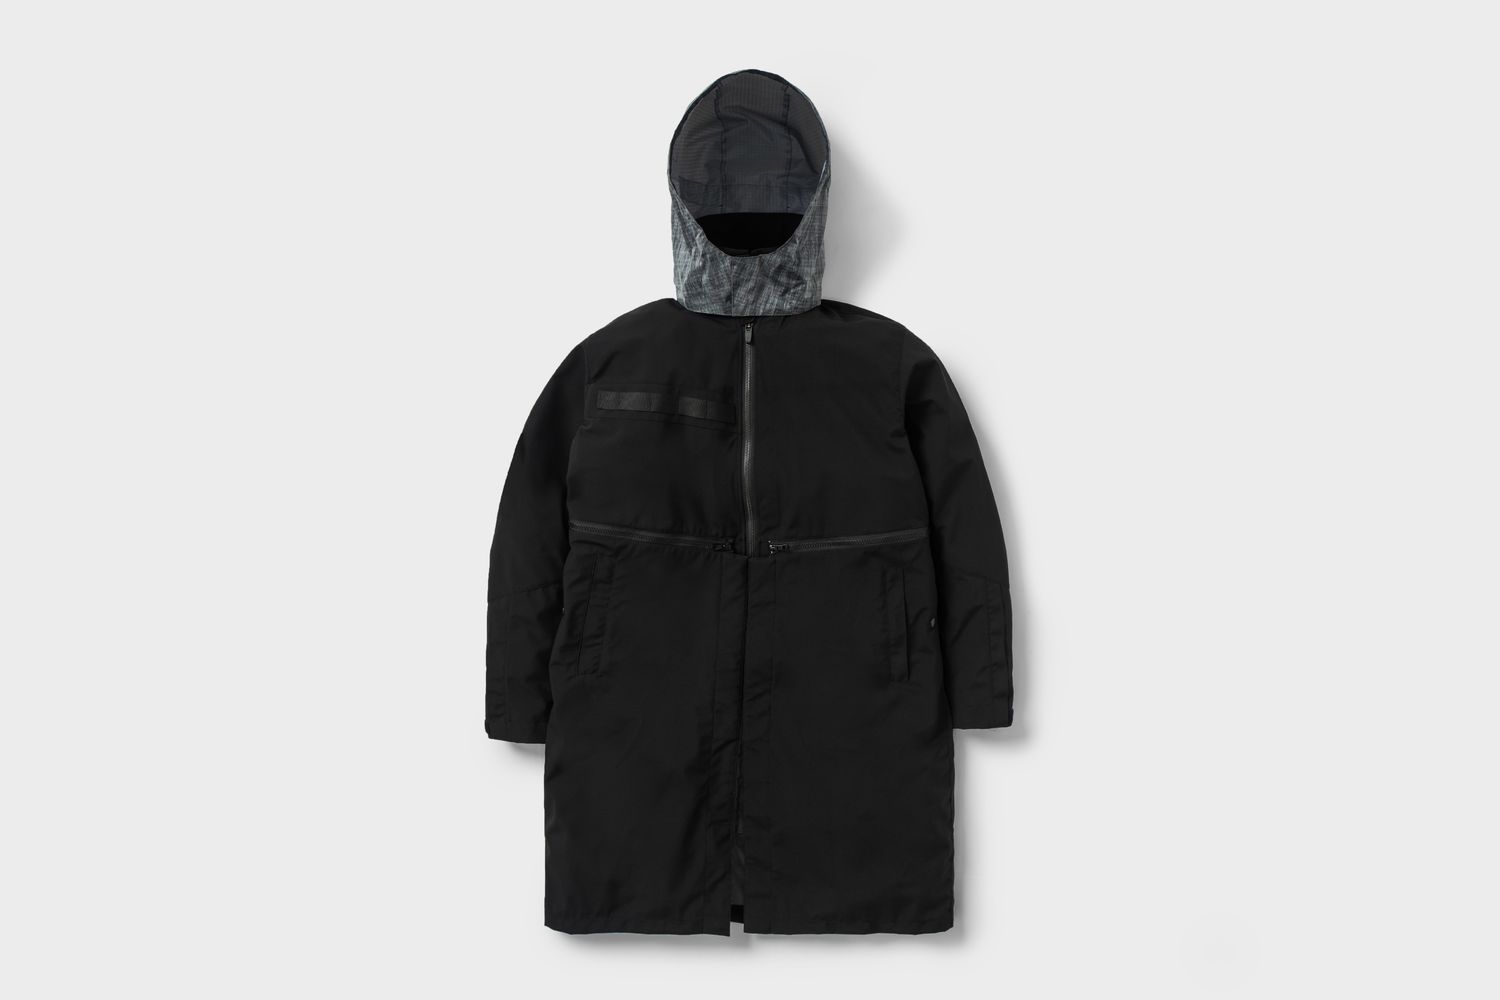 “NOT SS/AW” Multiform Jacket